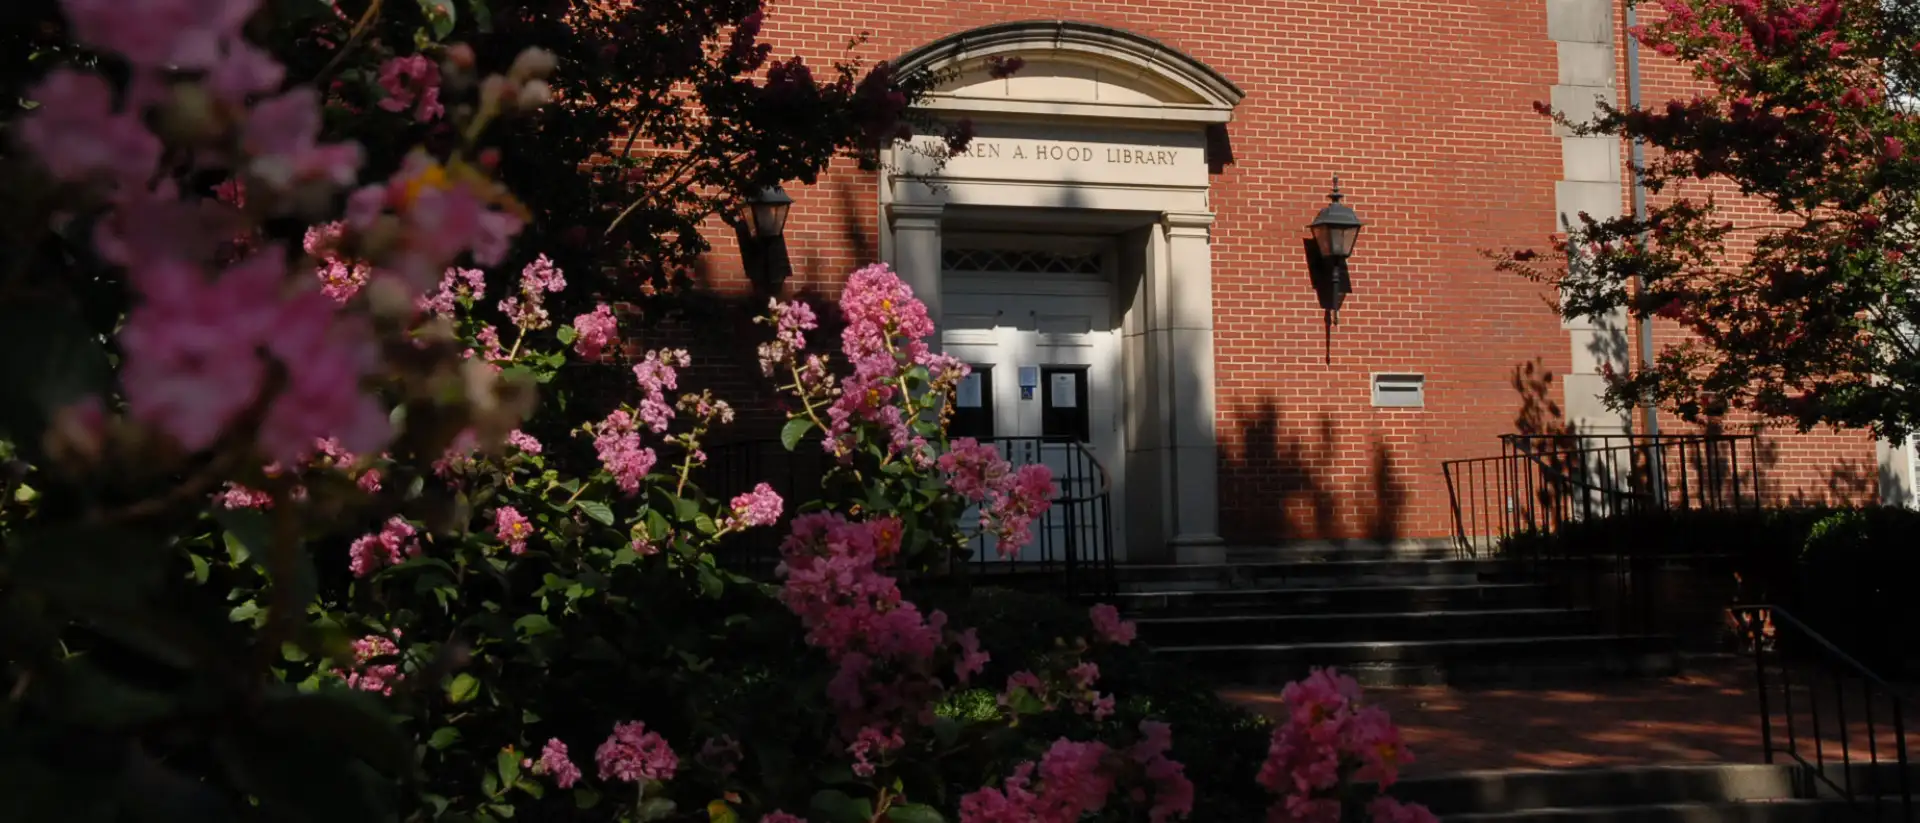 Hood Library with Azeleas in bloom